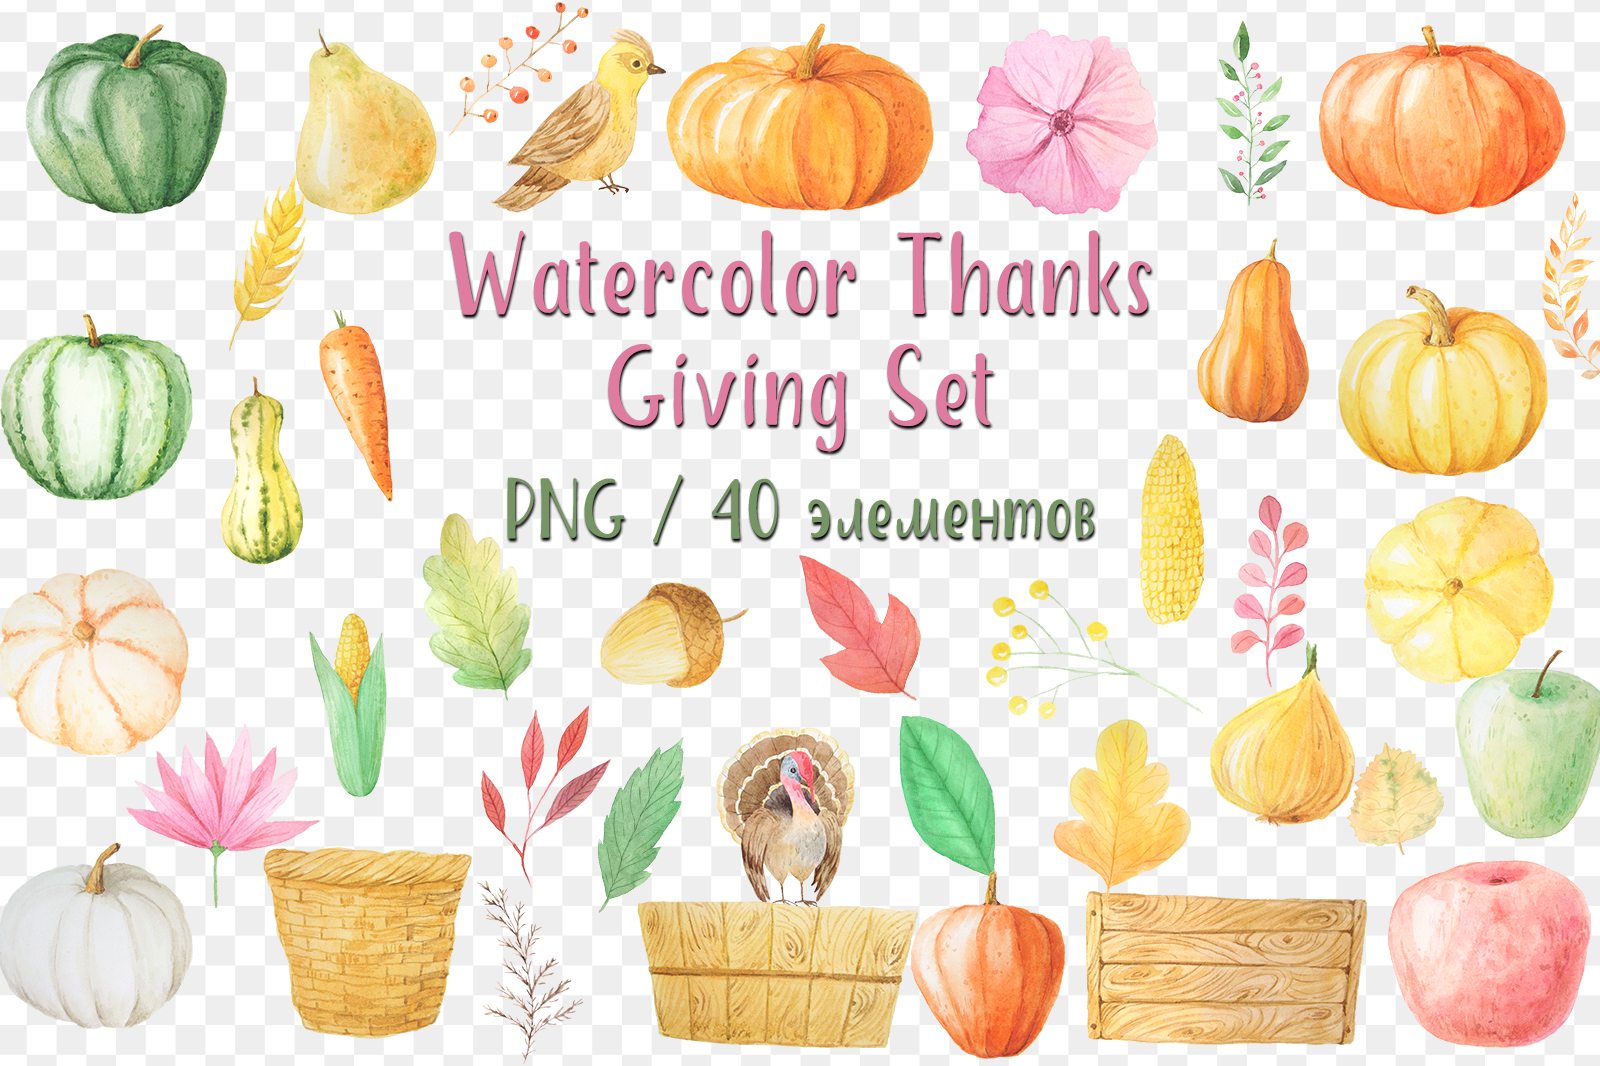 Watercolor Thanks Giving Set